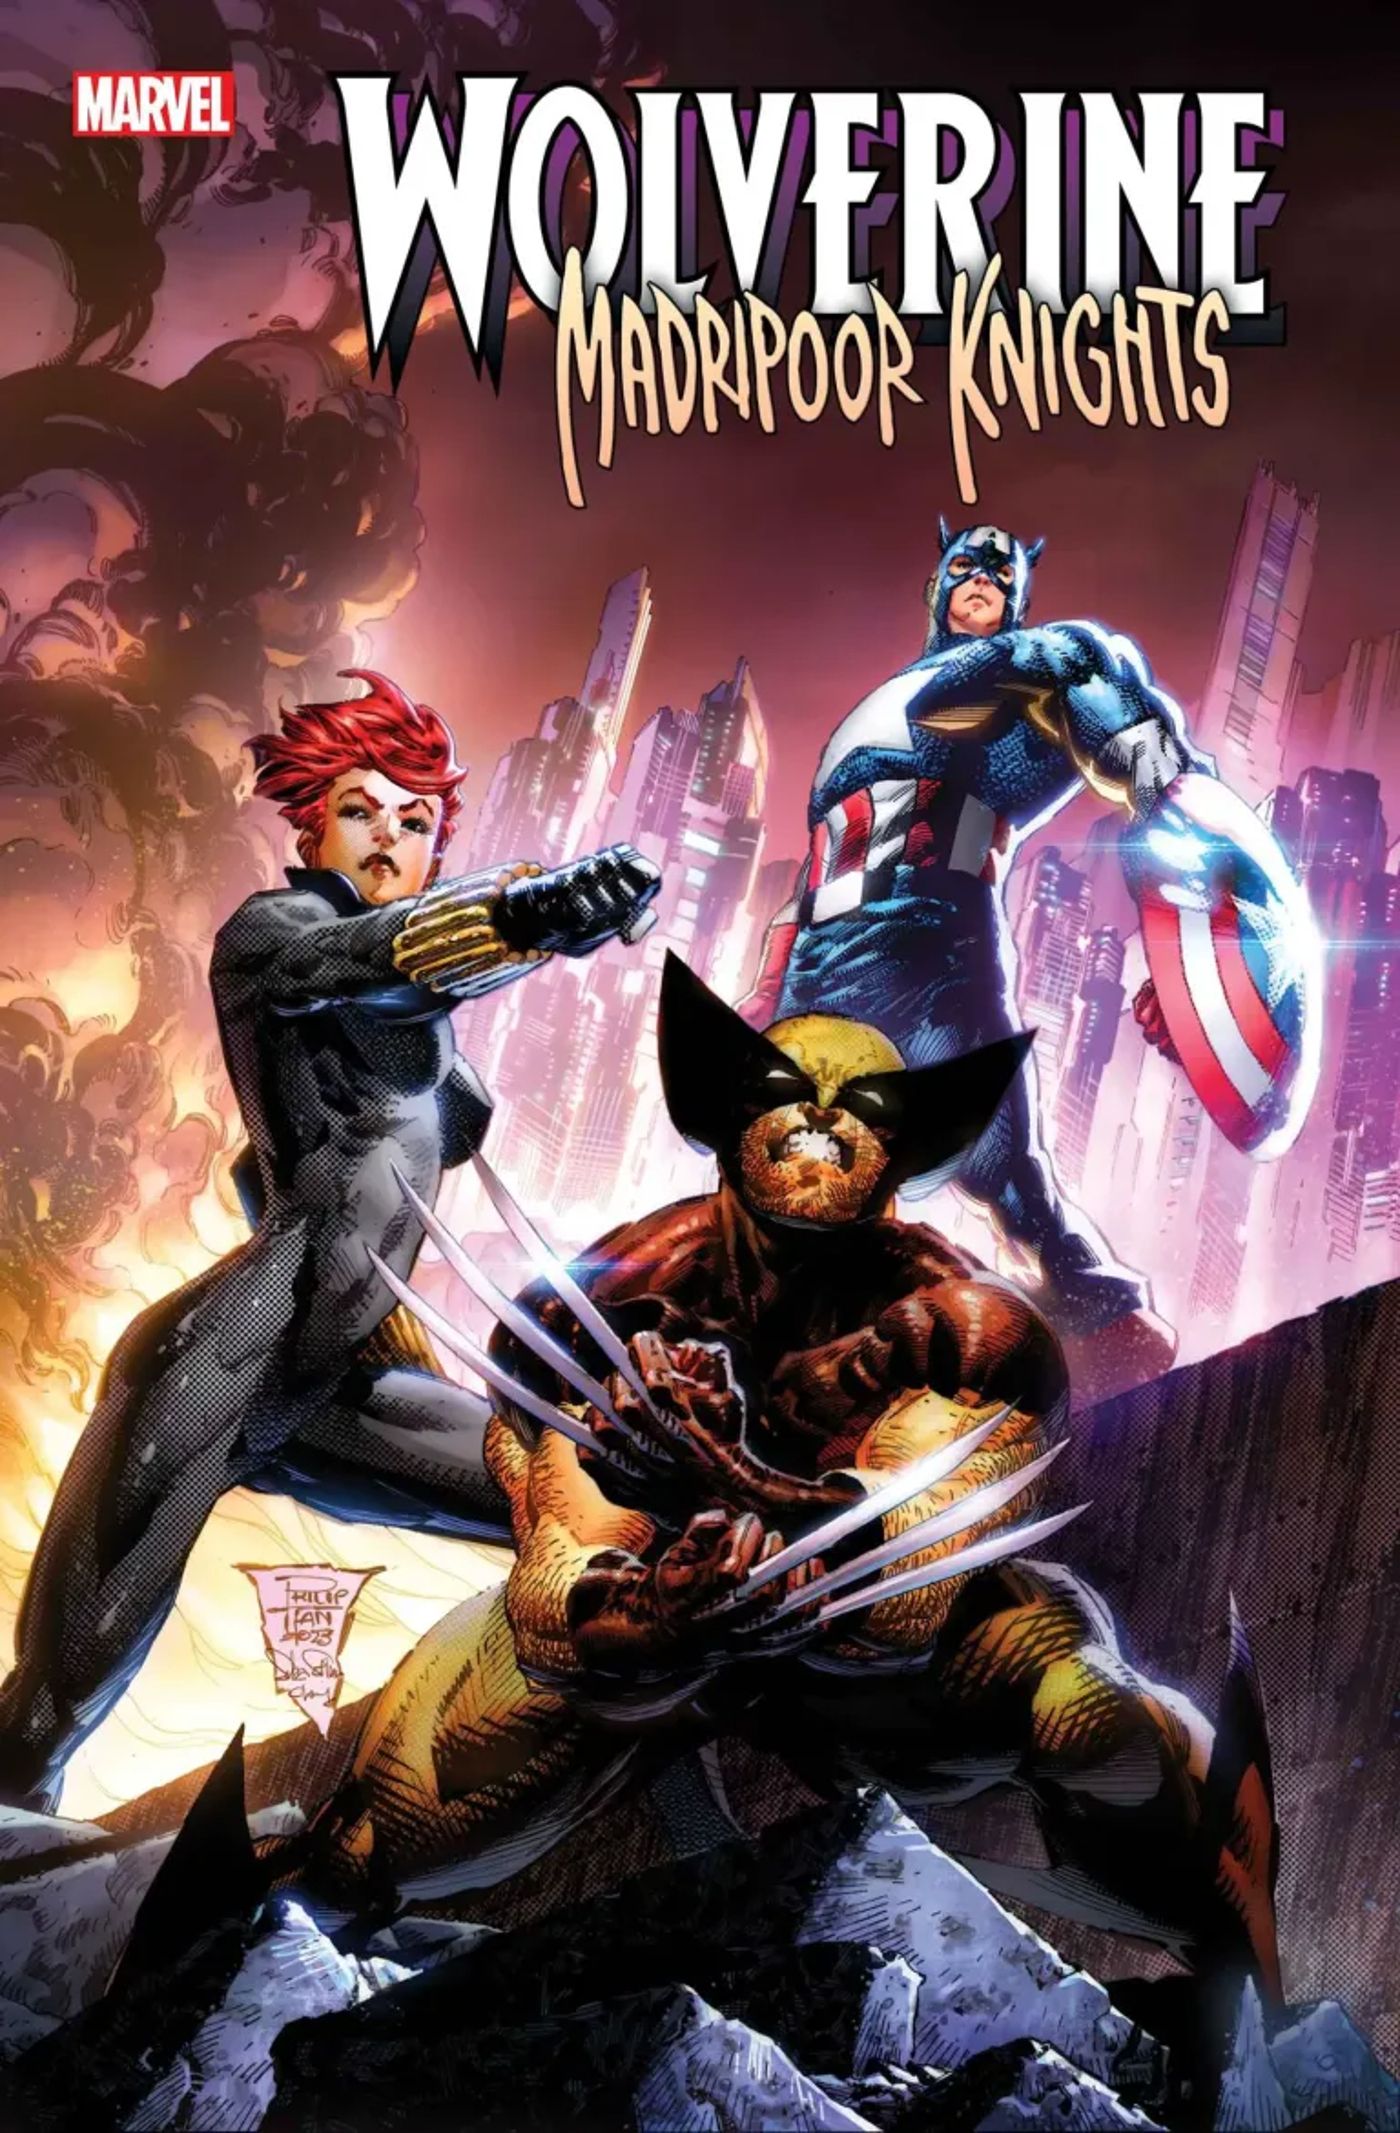 Cover for Madripoor Knights #1